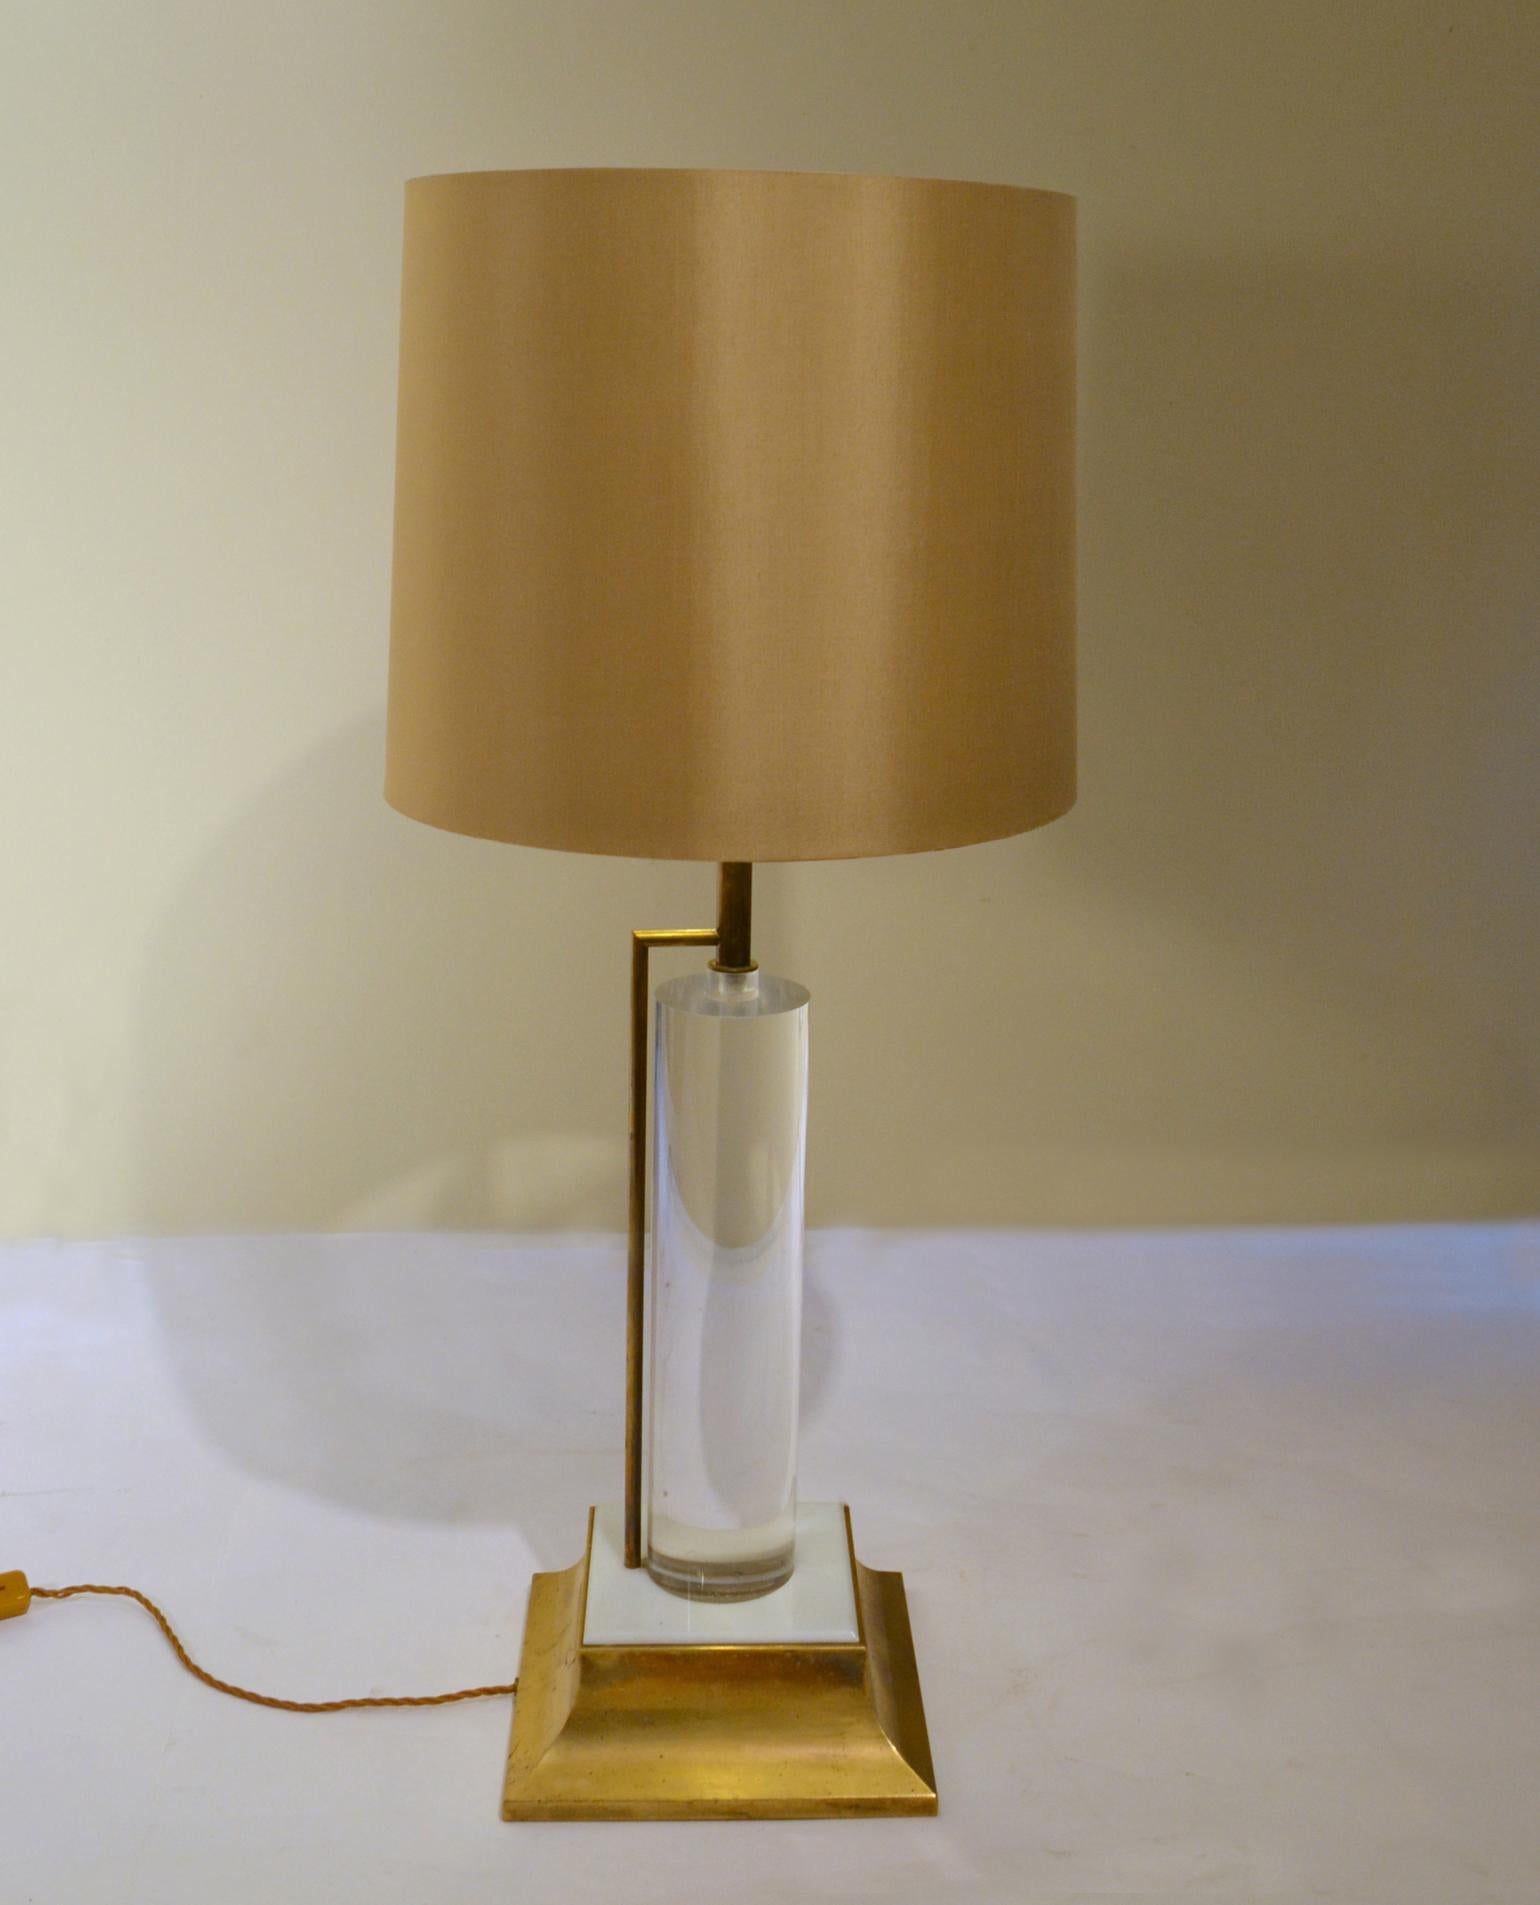 Mid Century Hollywood Regency style table lamp has a Lucite cylinder stem supported with a brass tume and base with a cream acrylic detail. Clever design, the brass supporting tube holds the wire so that the Lucite is crystal clear without visible